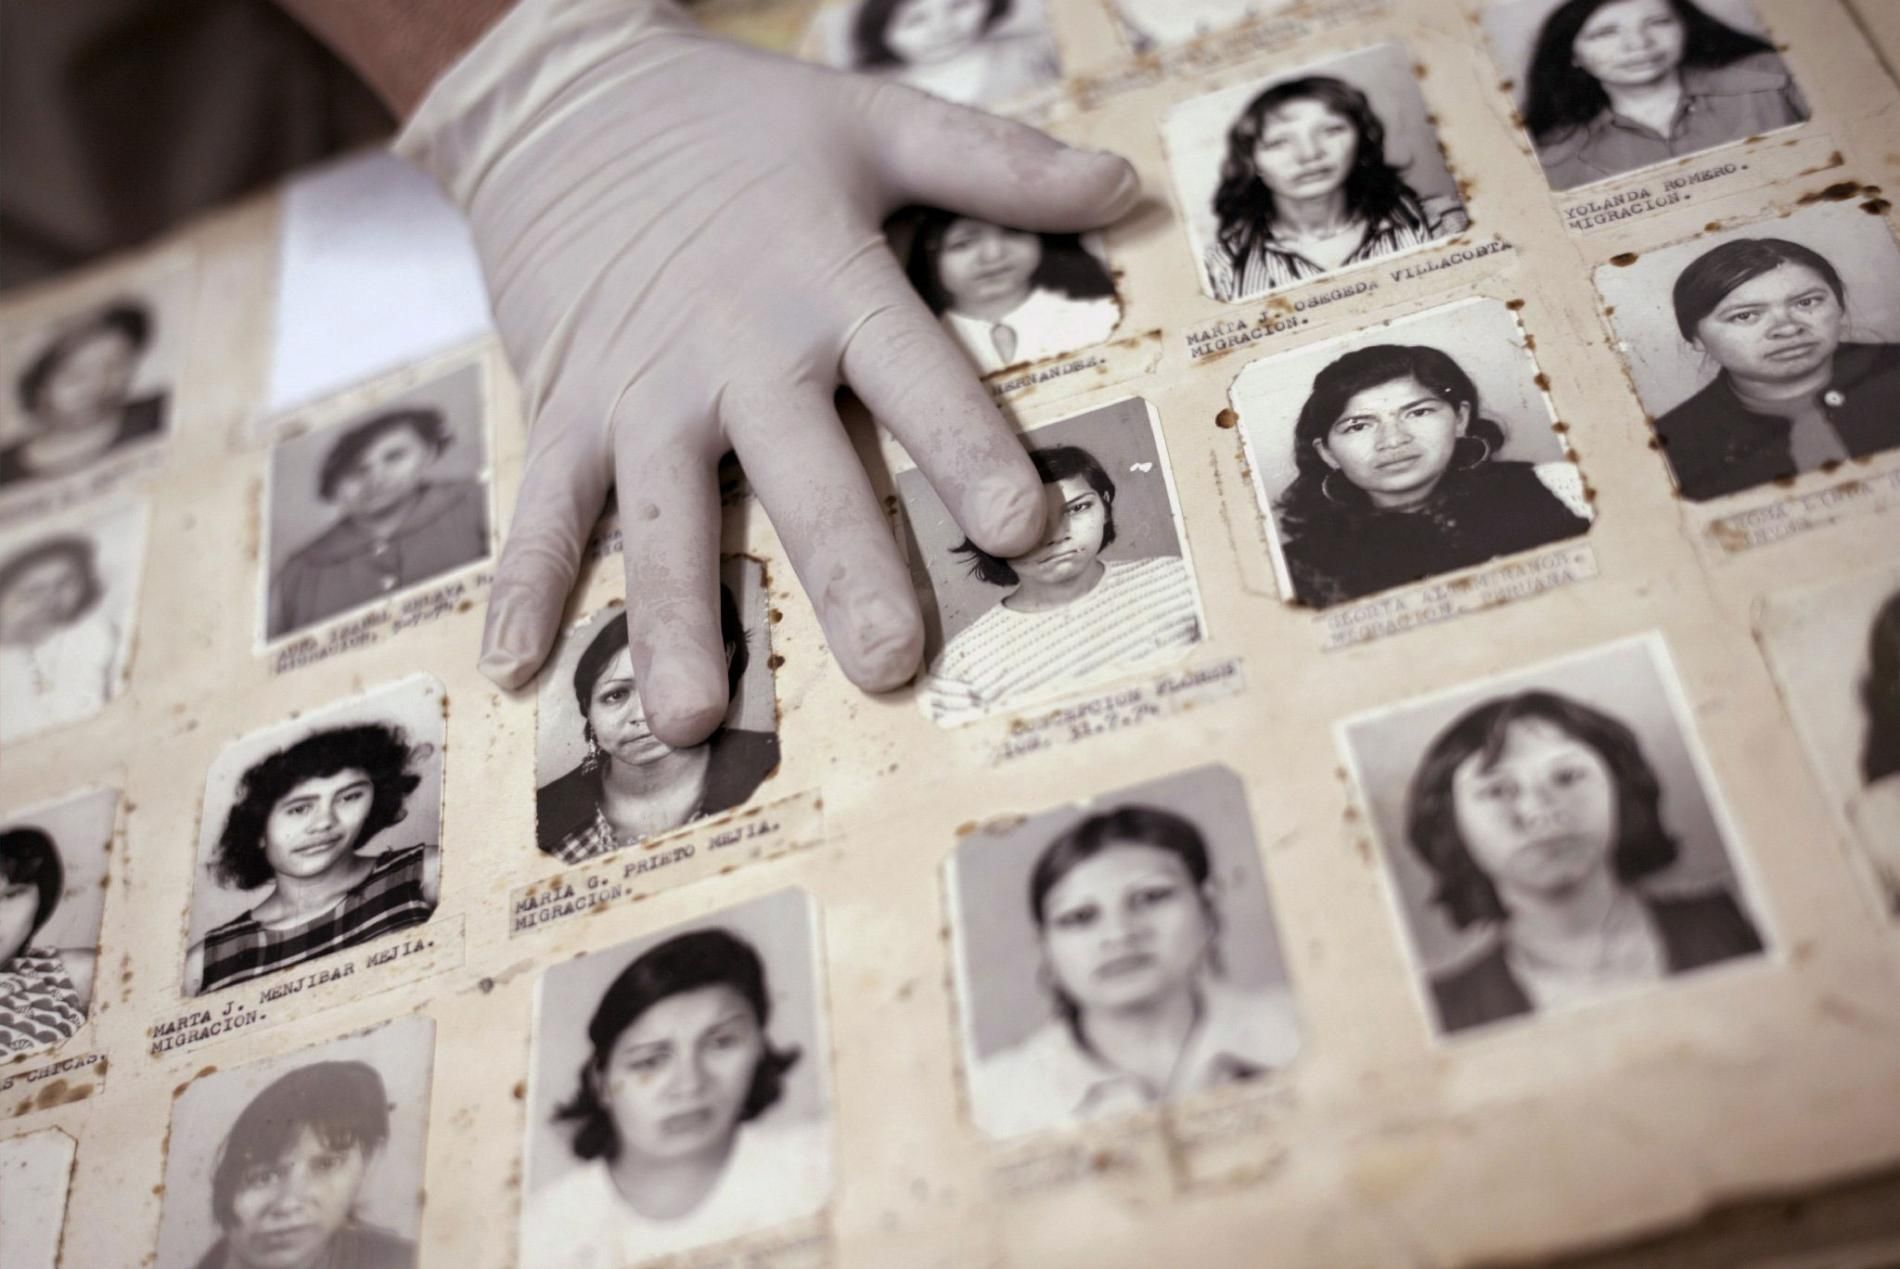 Guatemalans lived in fear of the National Police, which routinely detained and arrested citizens for vague reasons, and used information gathered during arrests to further intimidate and silence ordinary people. The archivists estimate that during the 1980s, the police possessed information about more than 1 million Guatemalans—some 15 percent of the population at the time. Image by Lynn Johnson. Guatemala, 2017.